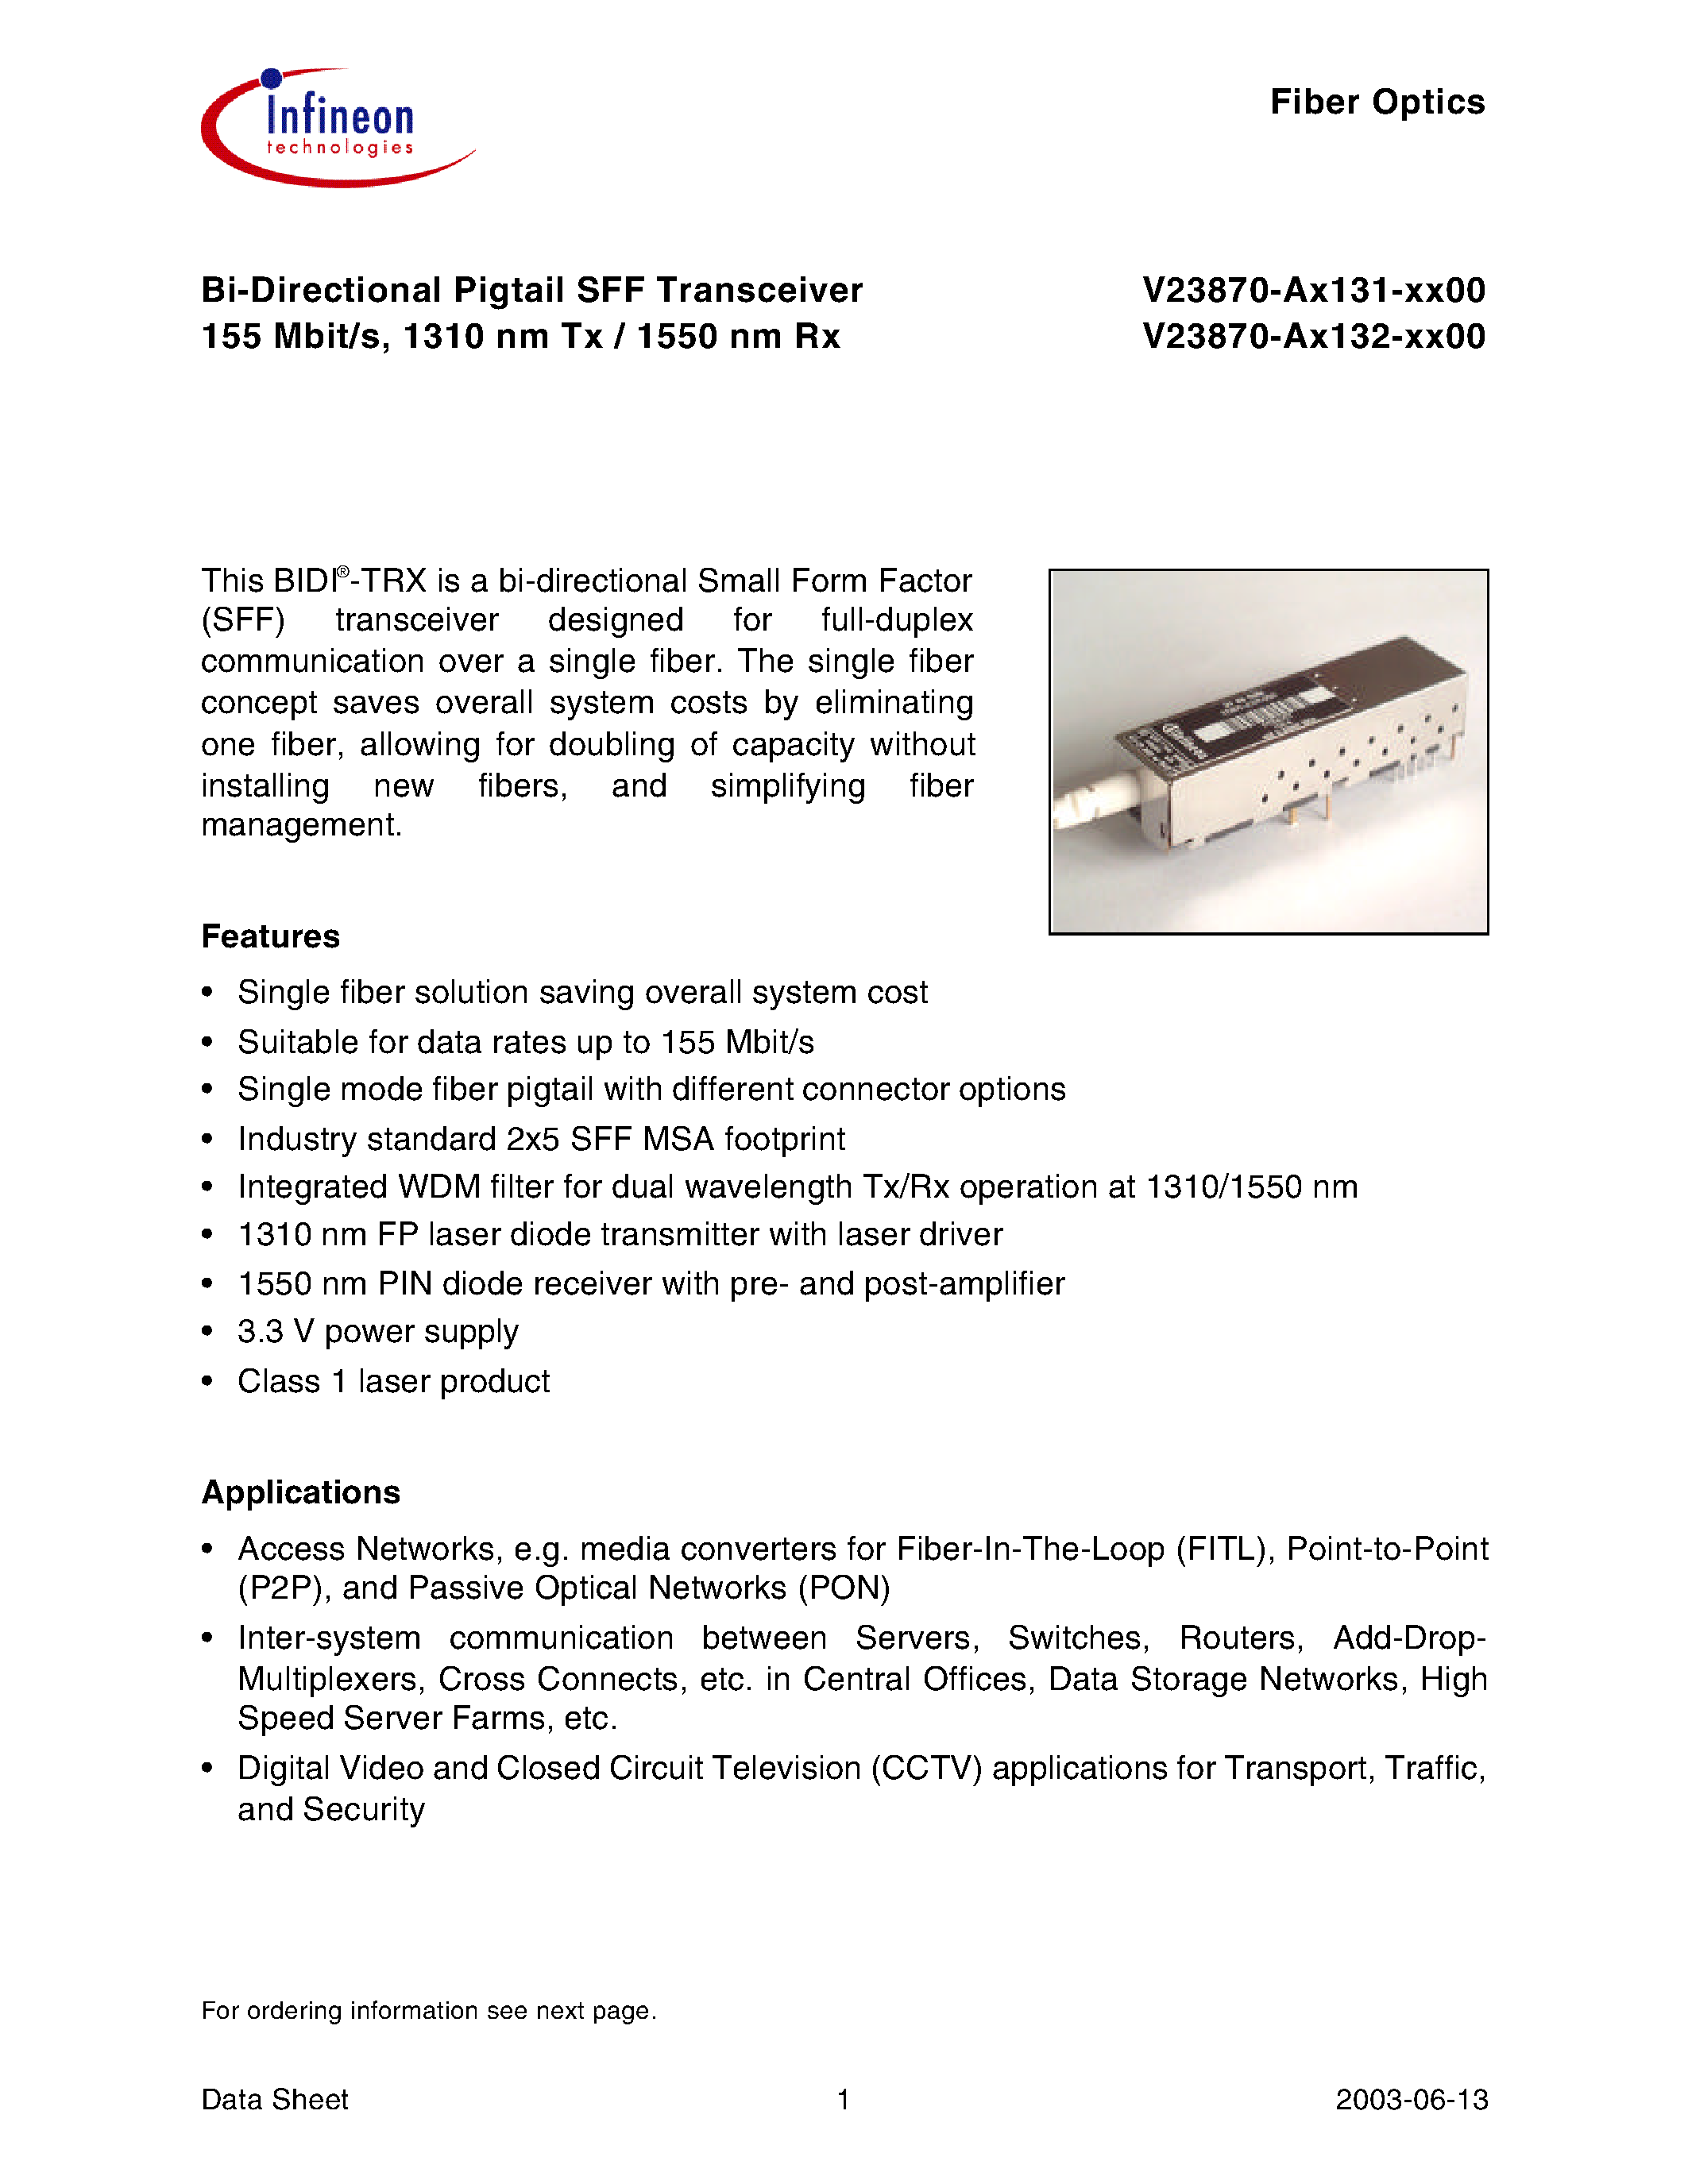 Datasheet V23870-A3132-A600 - Bi-Directional Pigtail SFF Transceiver 155 Mbit/s/ 1310 nm Tx / 1550 nm Rx page 1